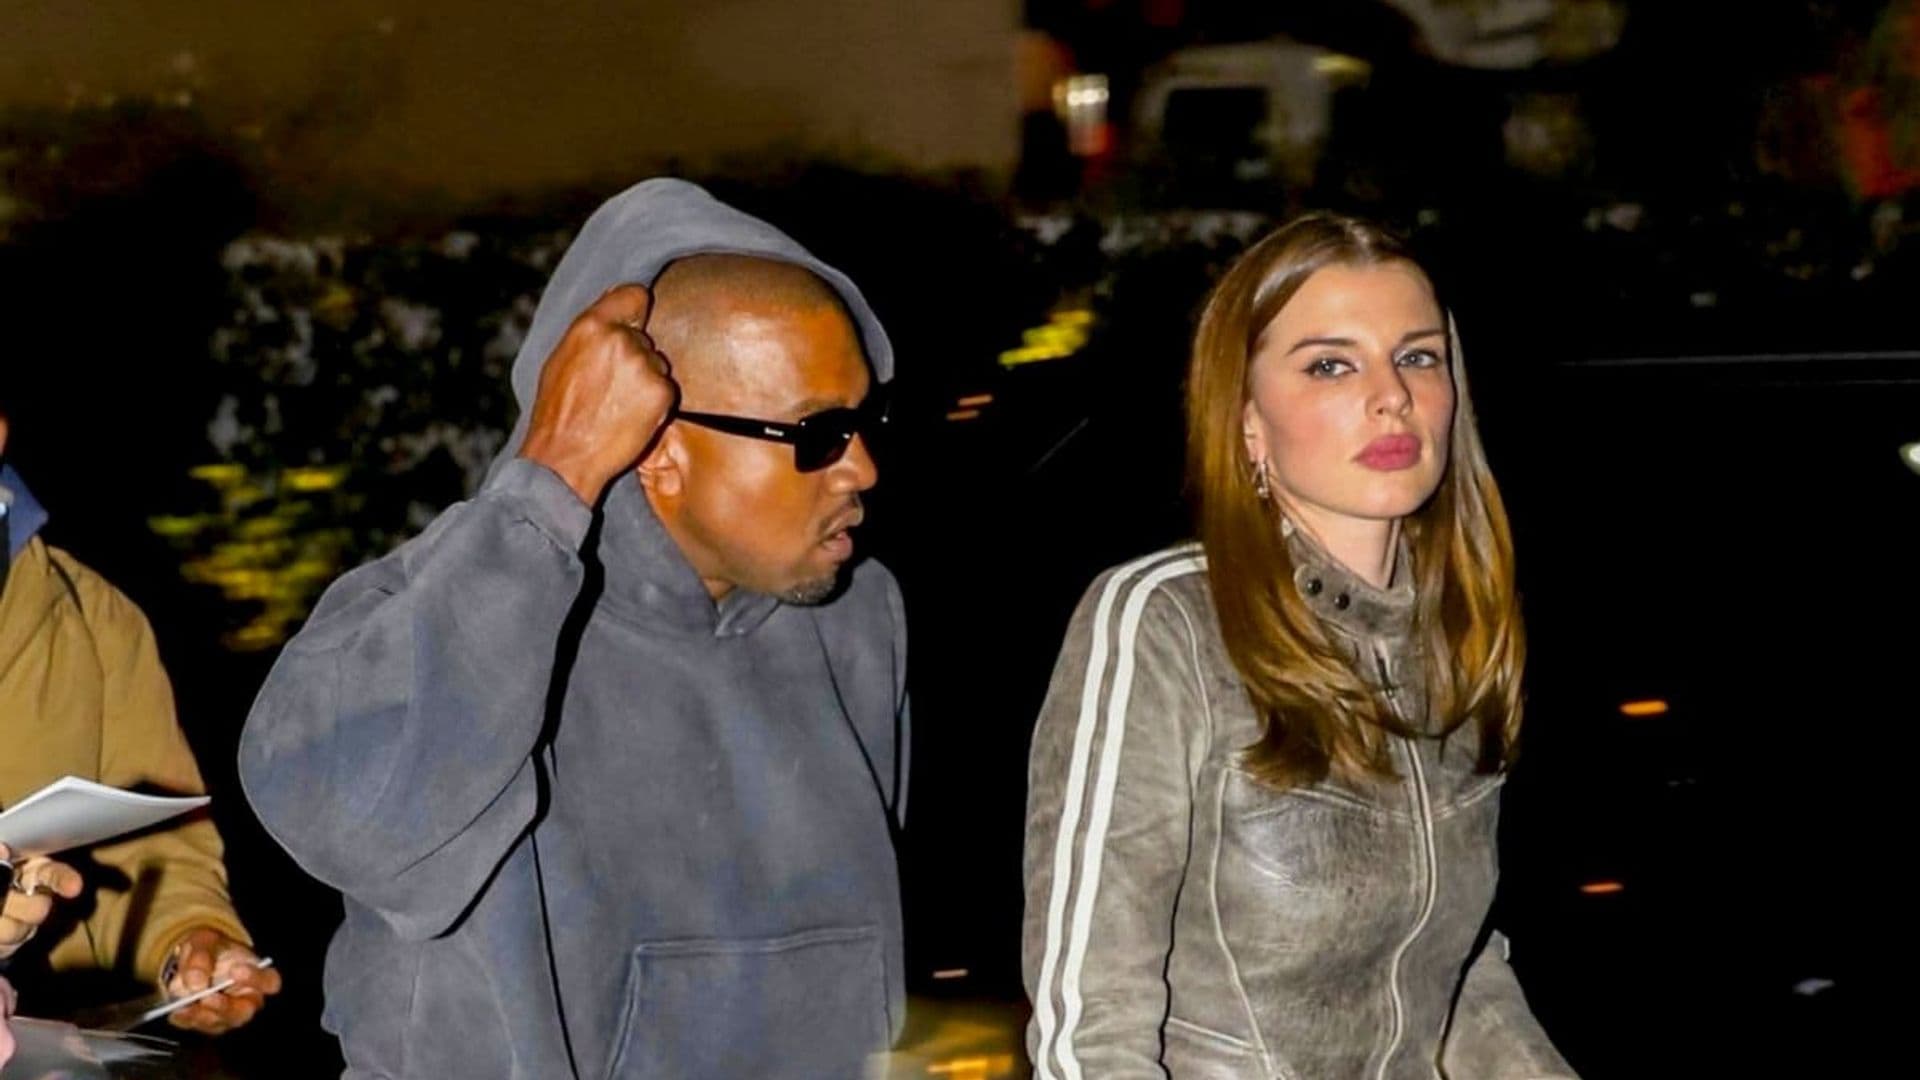 Kanye West and Julia Fox spotted again on date night